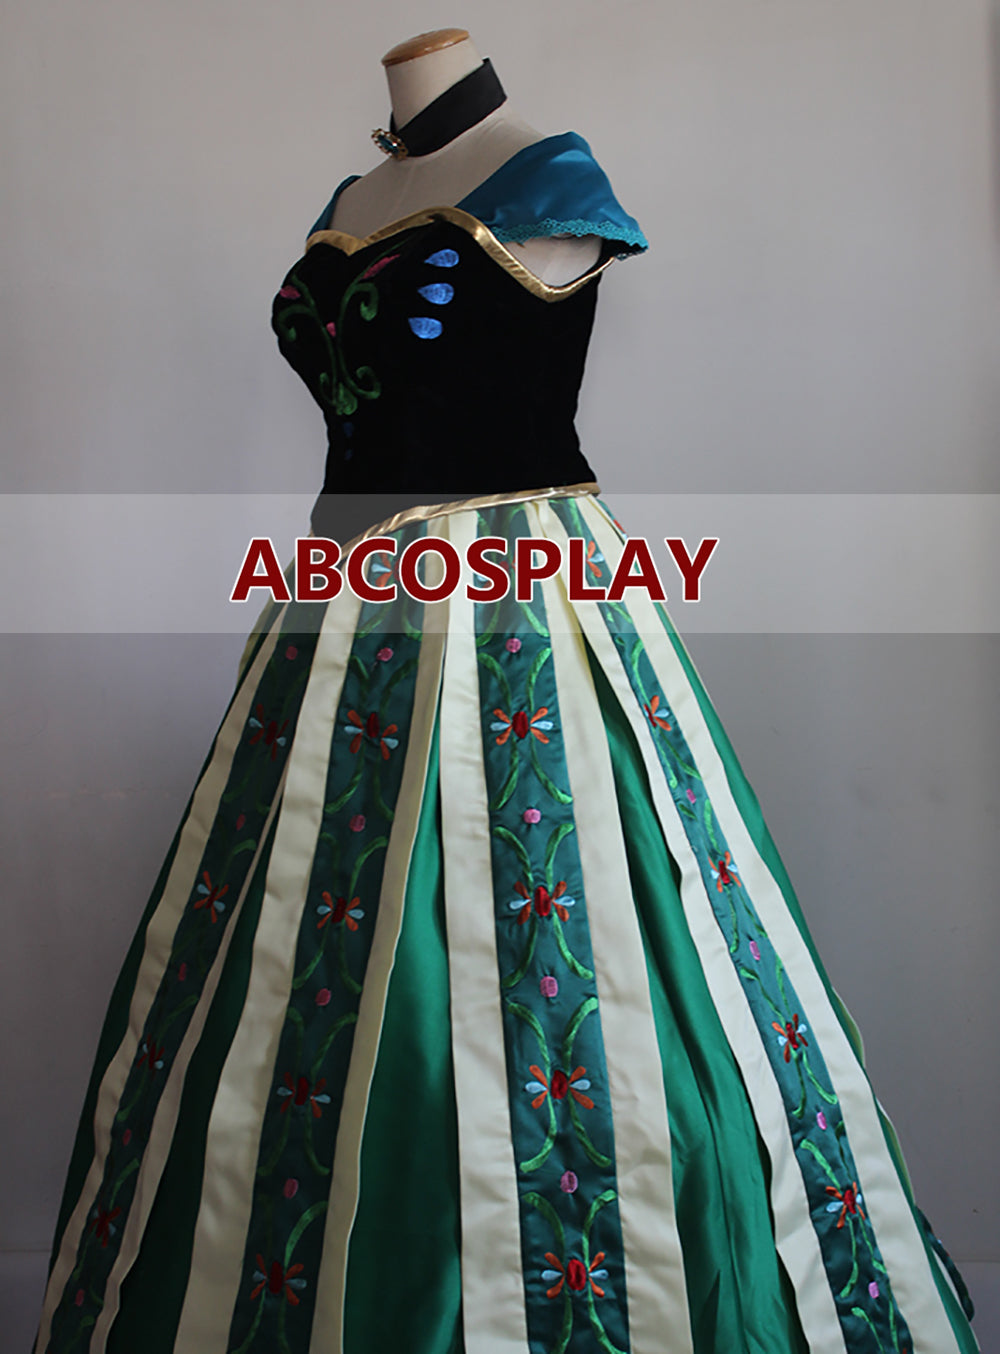 Frozen Anna Embroidery Dress Style 2 Cosplay Costume